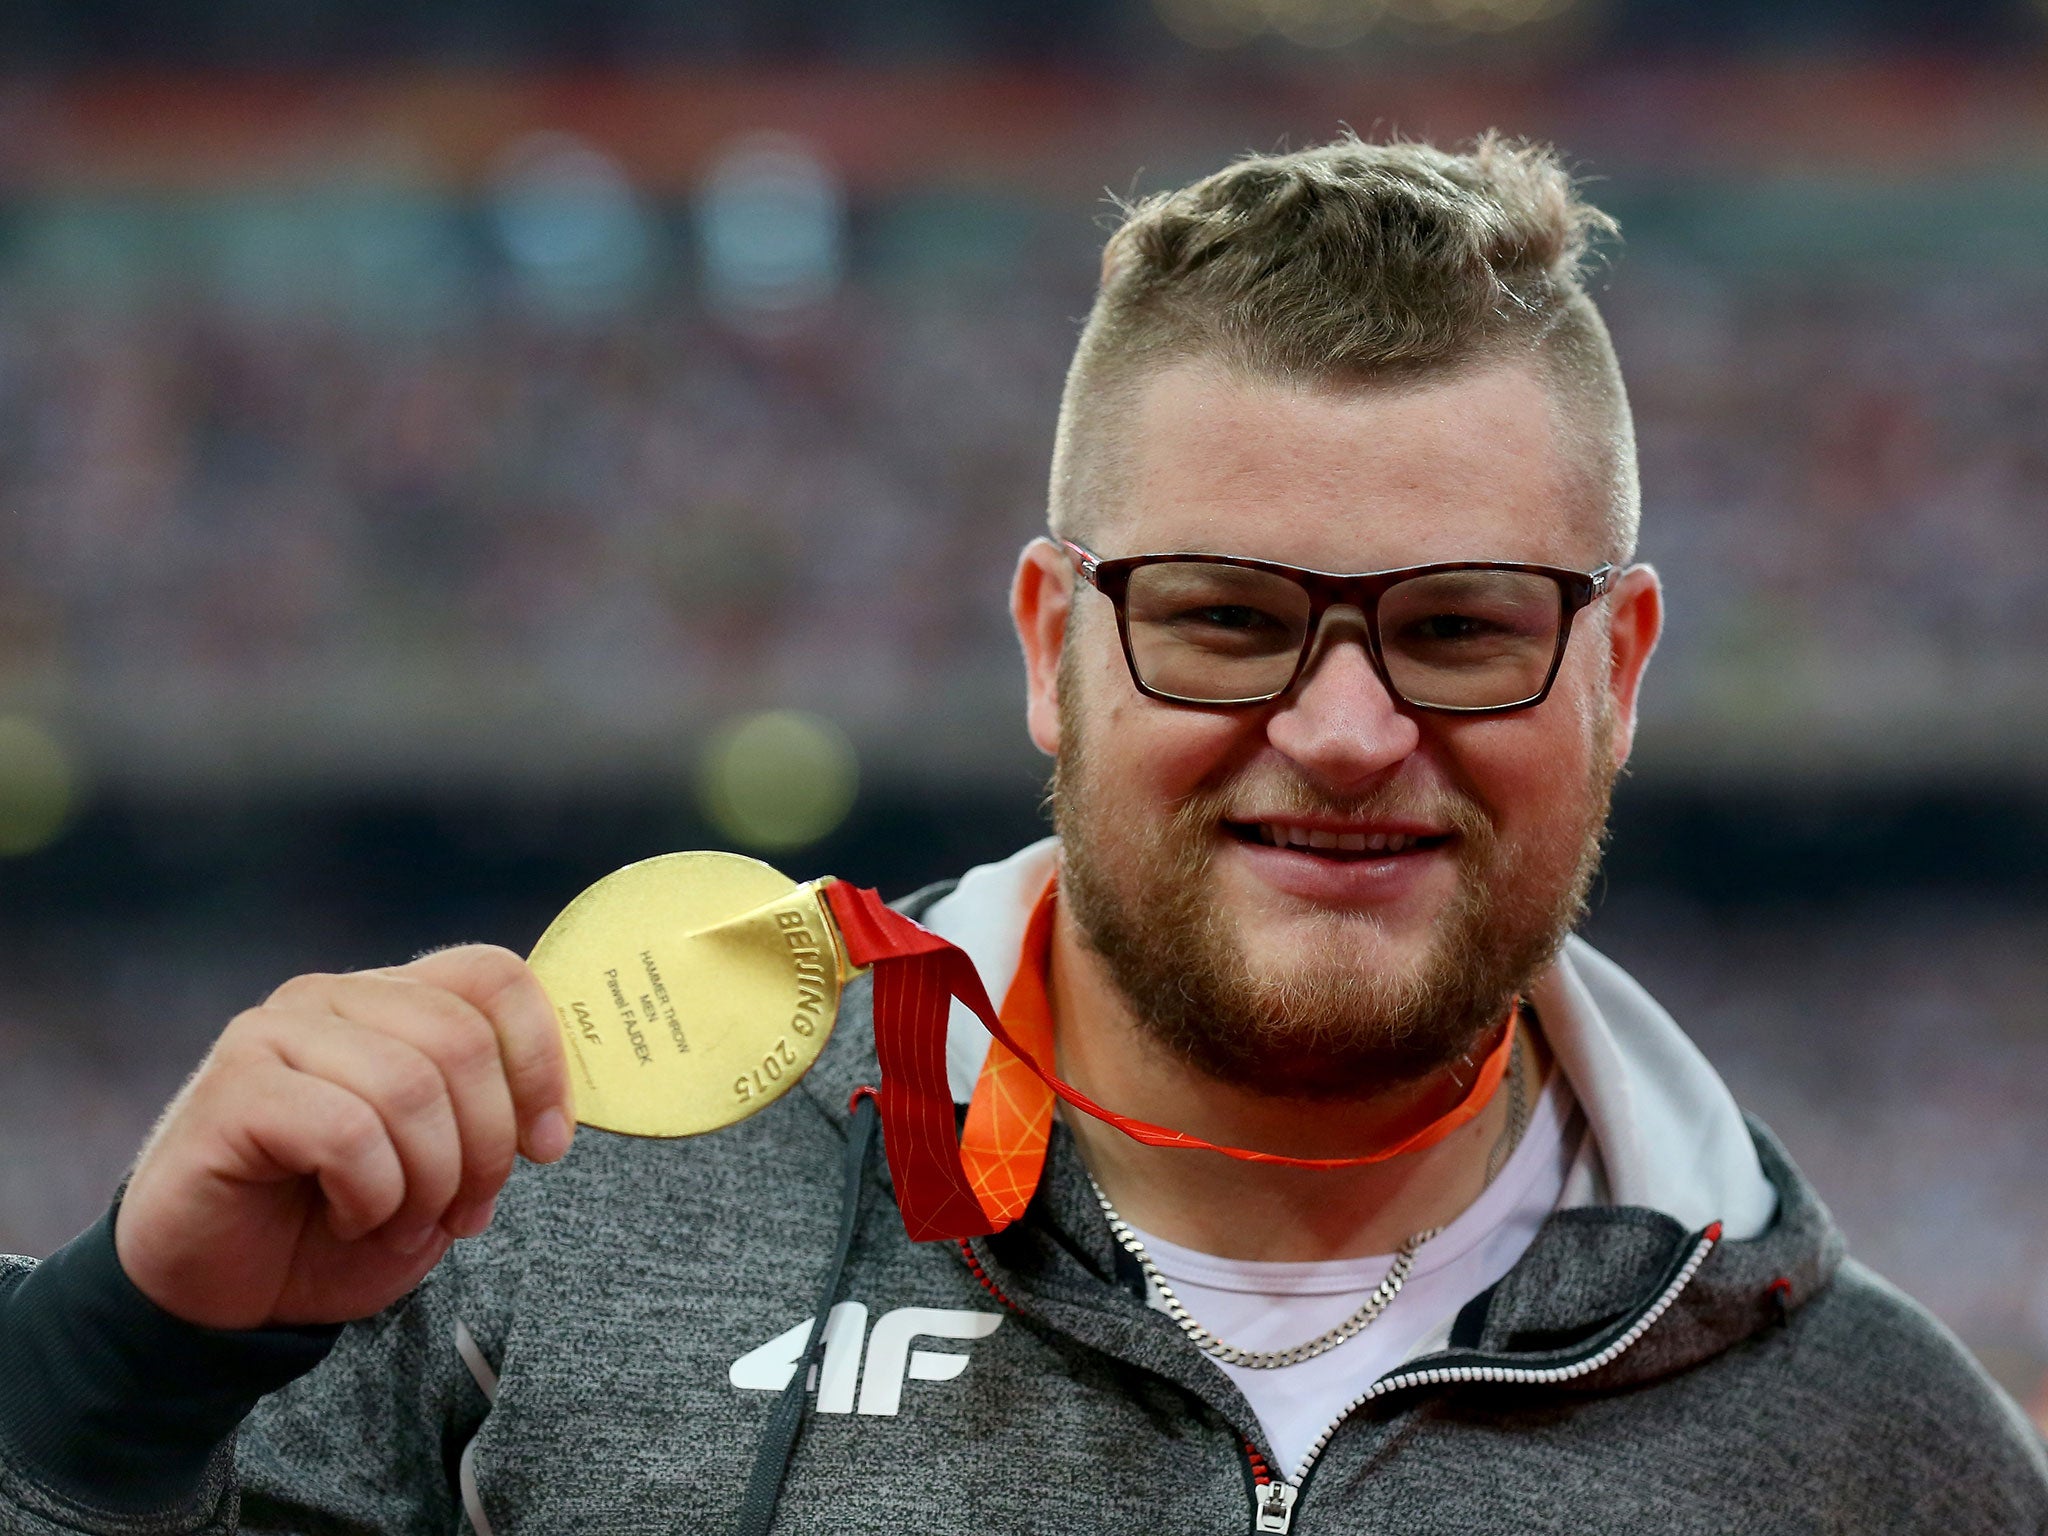 Pawel Fajdek shows off his gold medal in the hammer